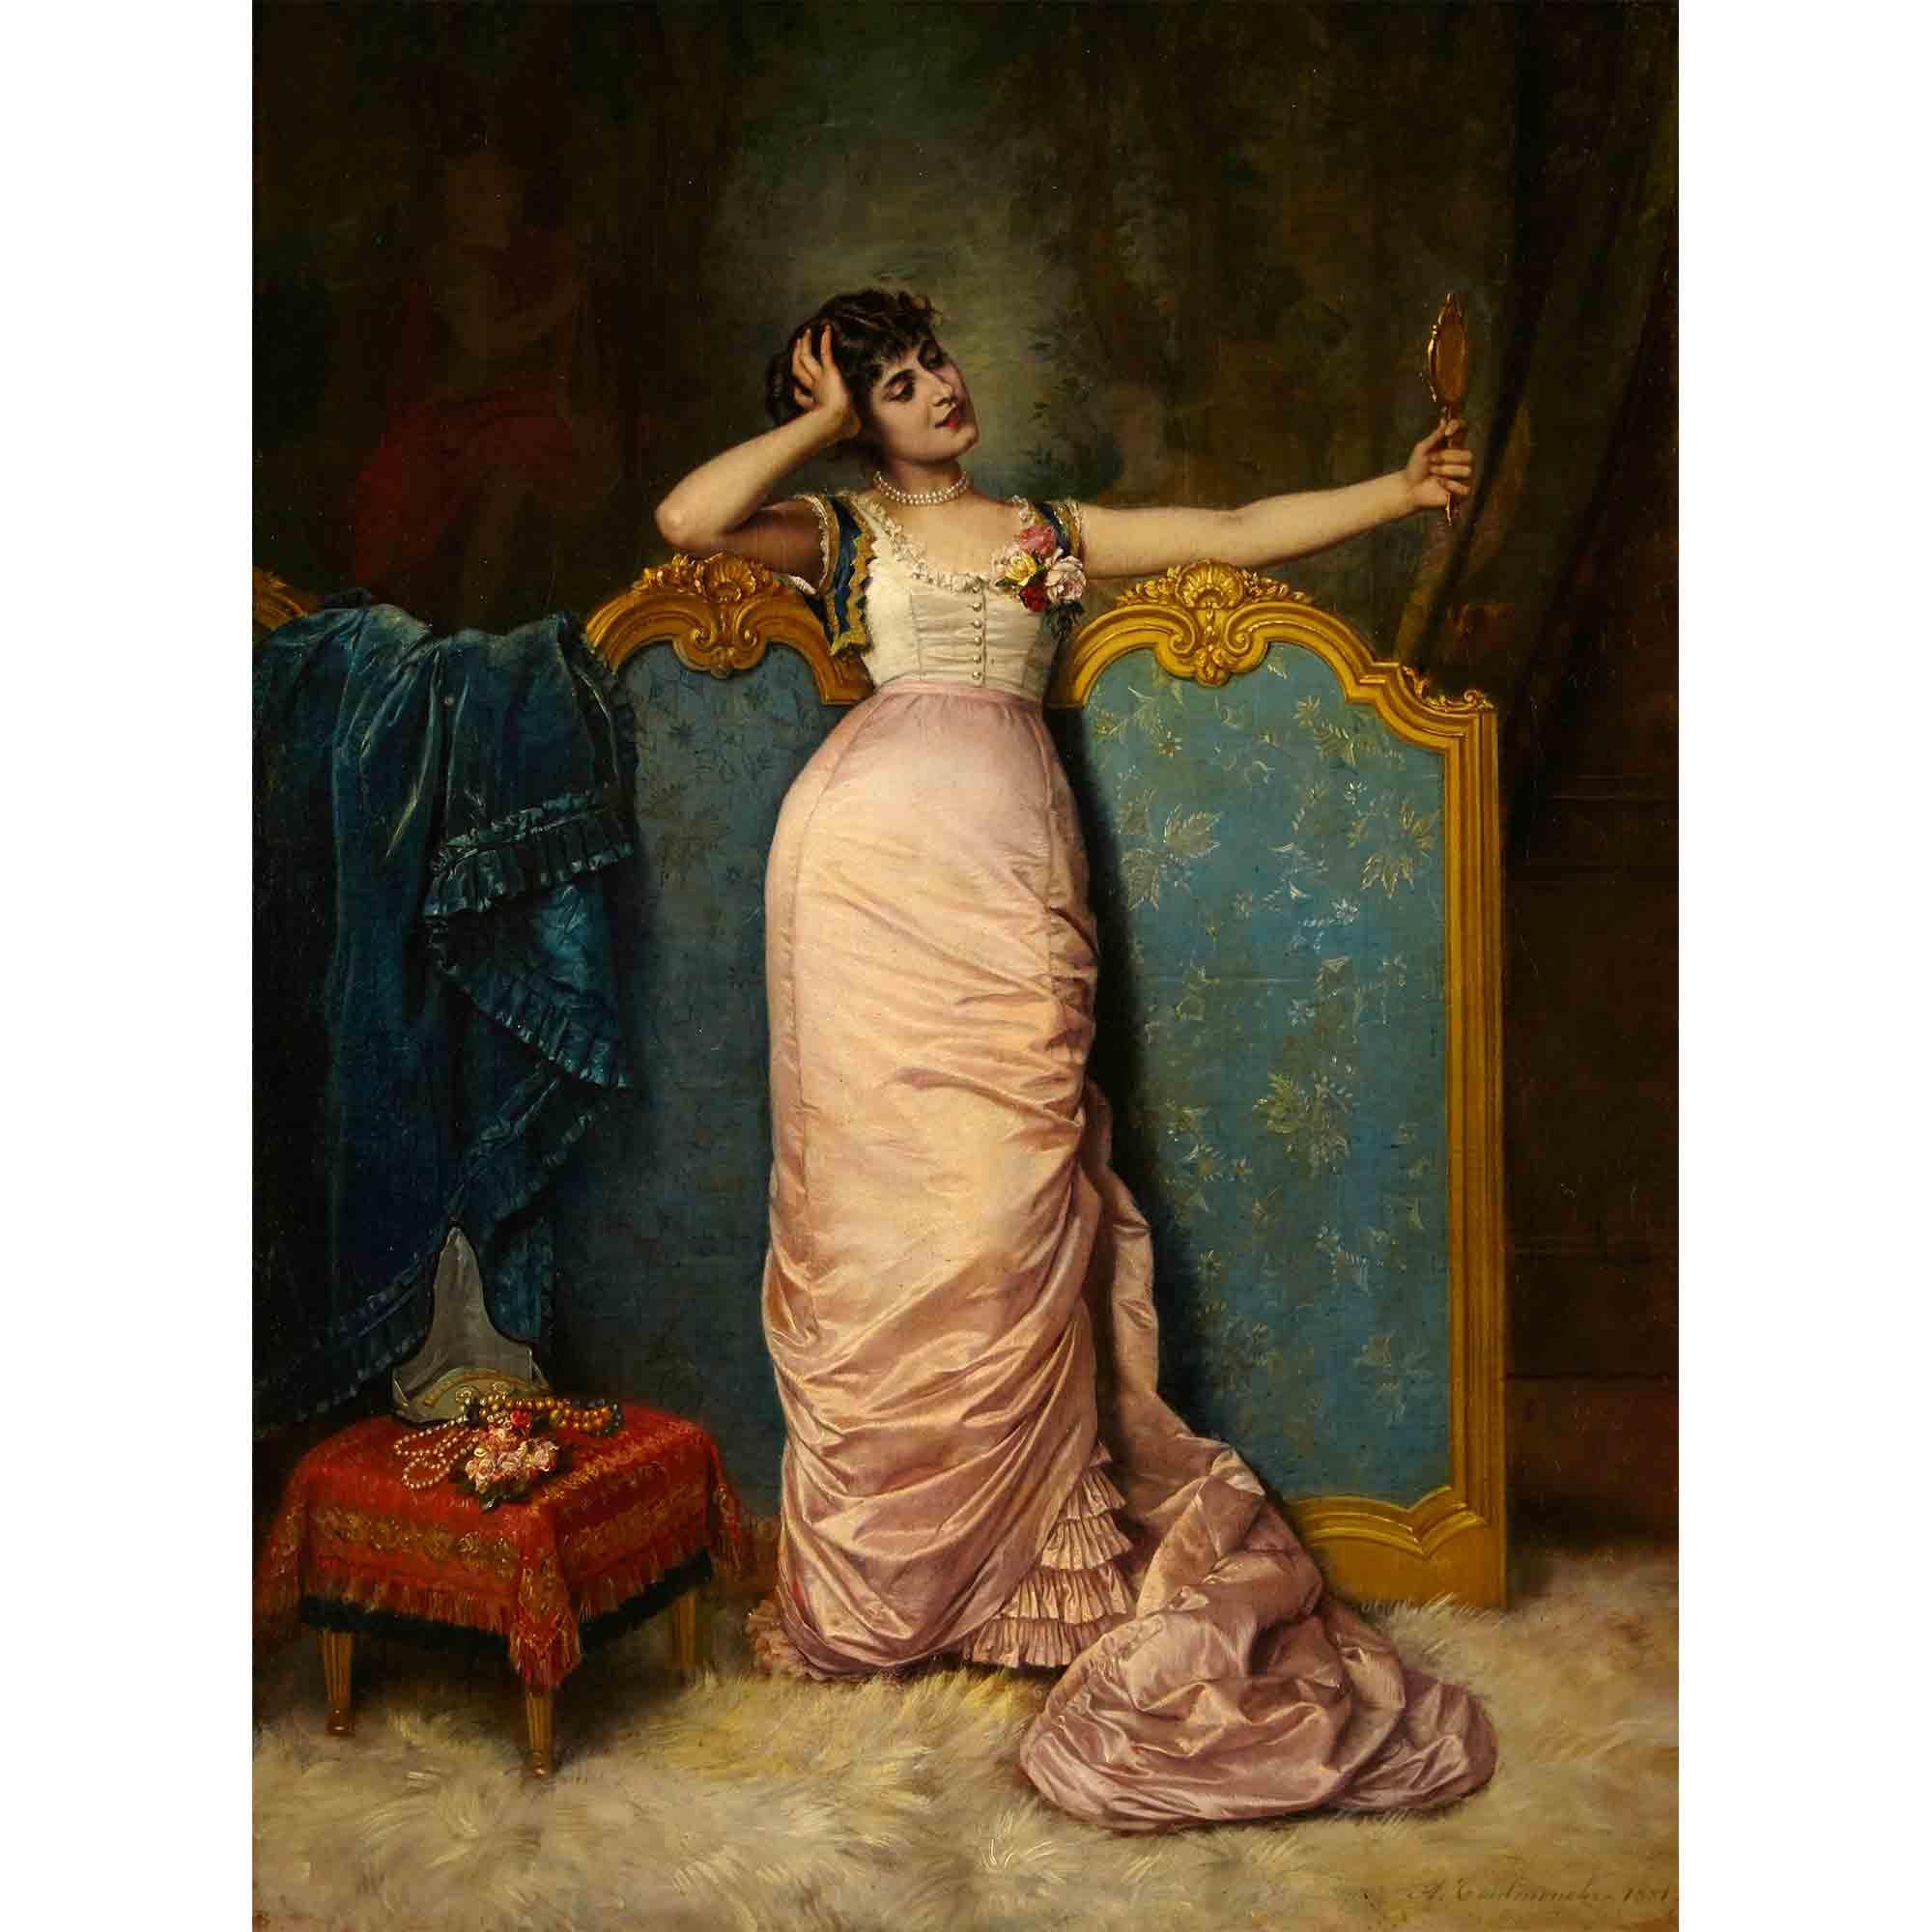 "Admiring Her Looks" by Auguste Toulmouche is a quintessential example of 19th-century academic art, emphasizing beauty and technique. Toulmouche's work often explores themes of femininity and domestic opulence, with this piece encapsulating a